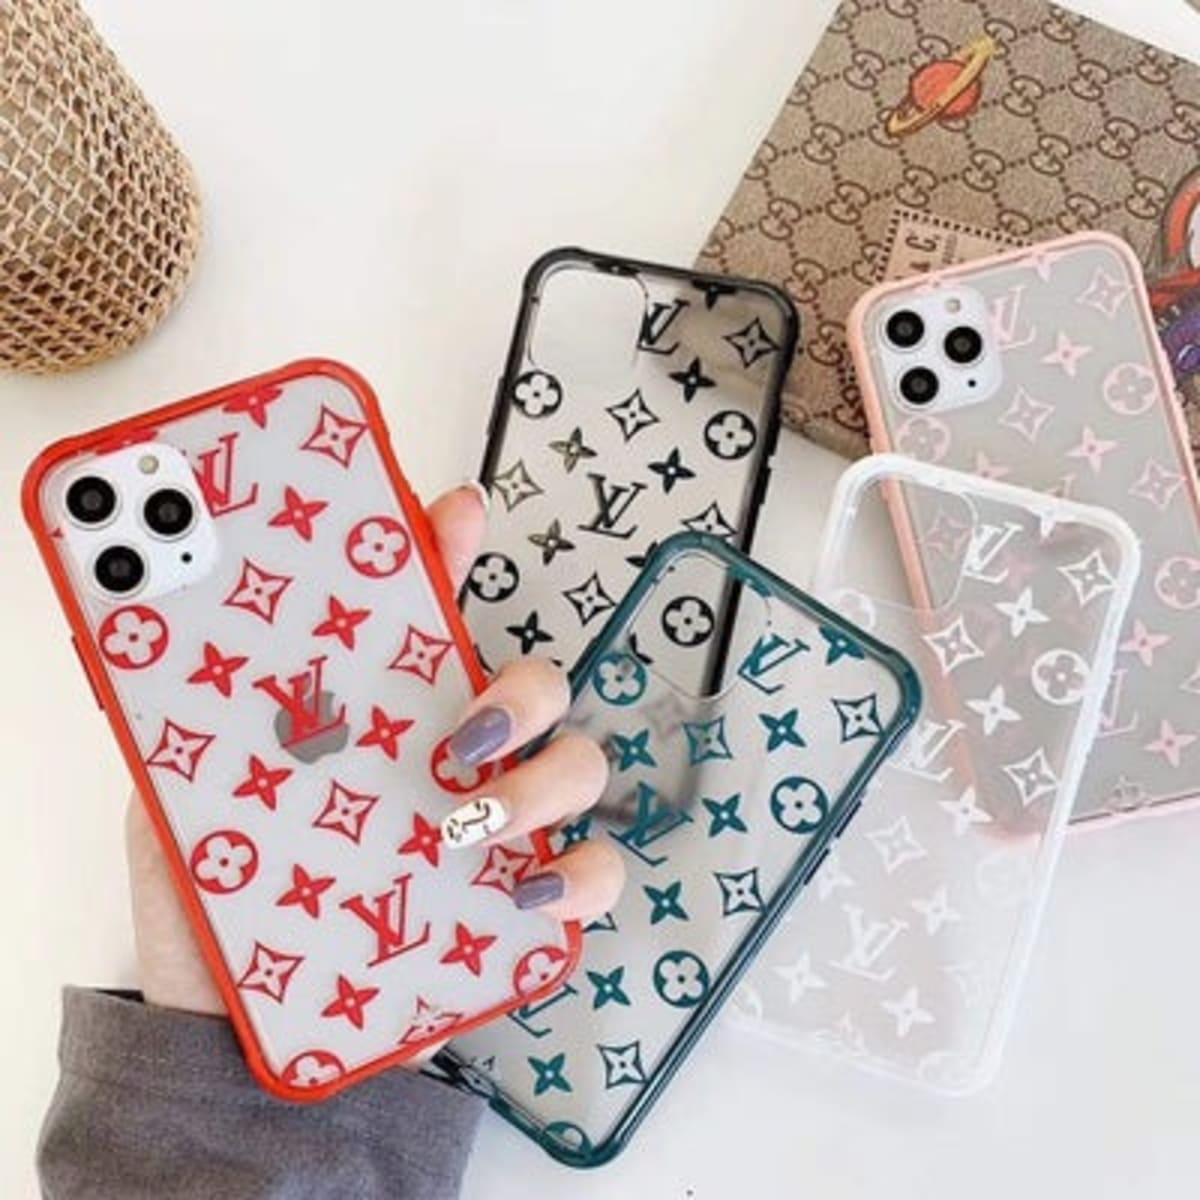 iSHOP Ghana - Louis Vuitton iPhone 11 Pro Max Trunk Case GH¢80 Delivery in  1Hr, Call 0244359596